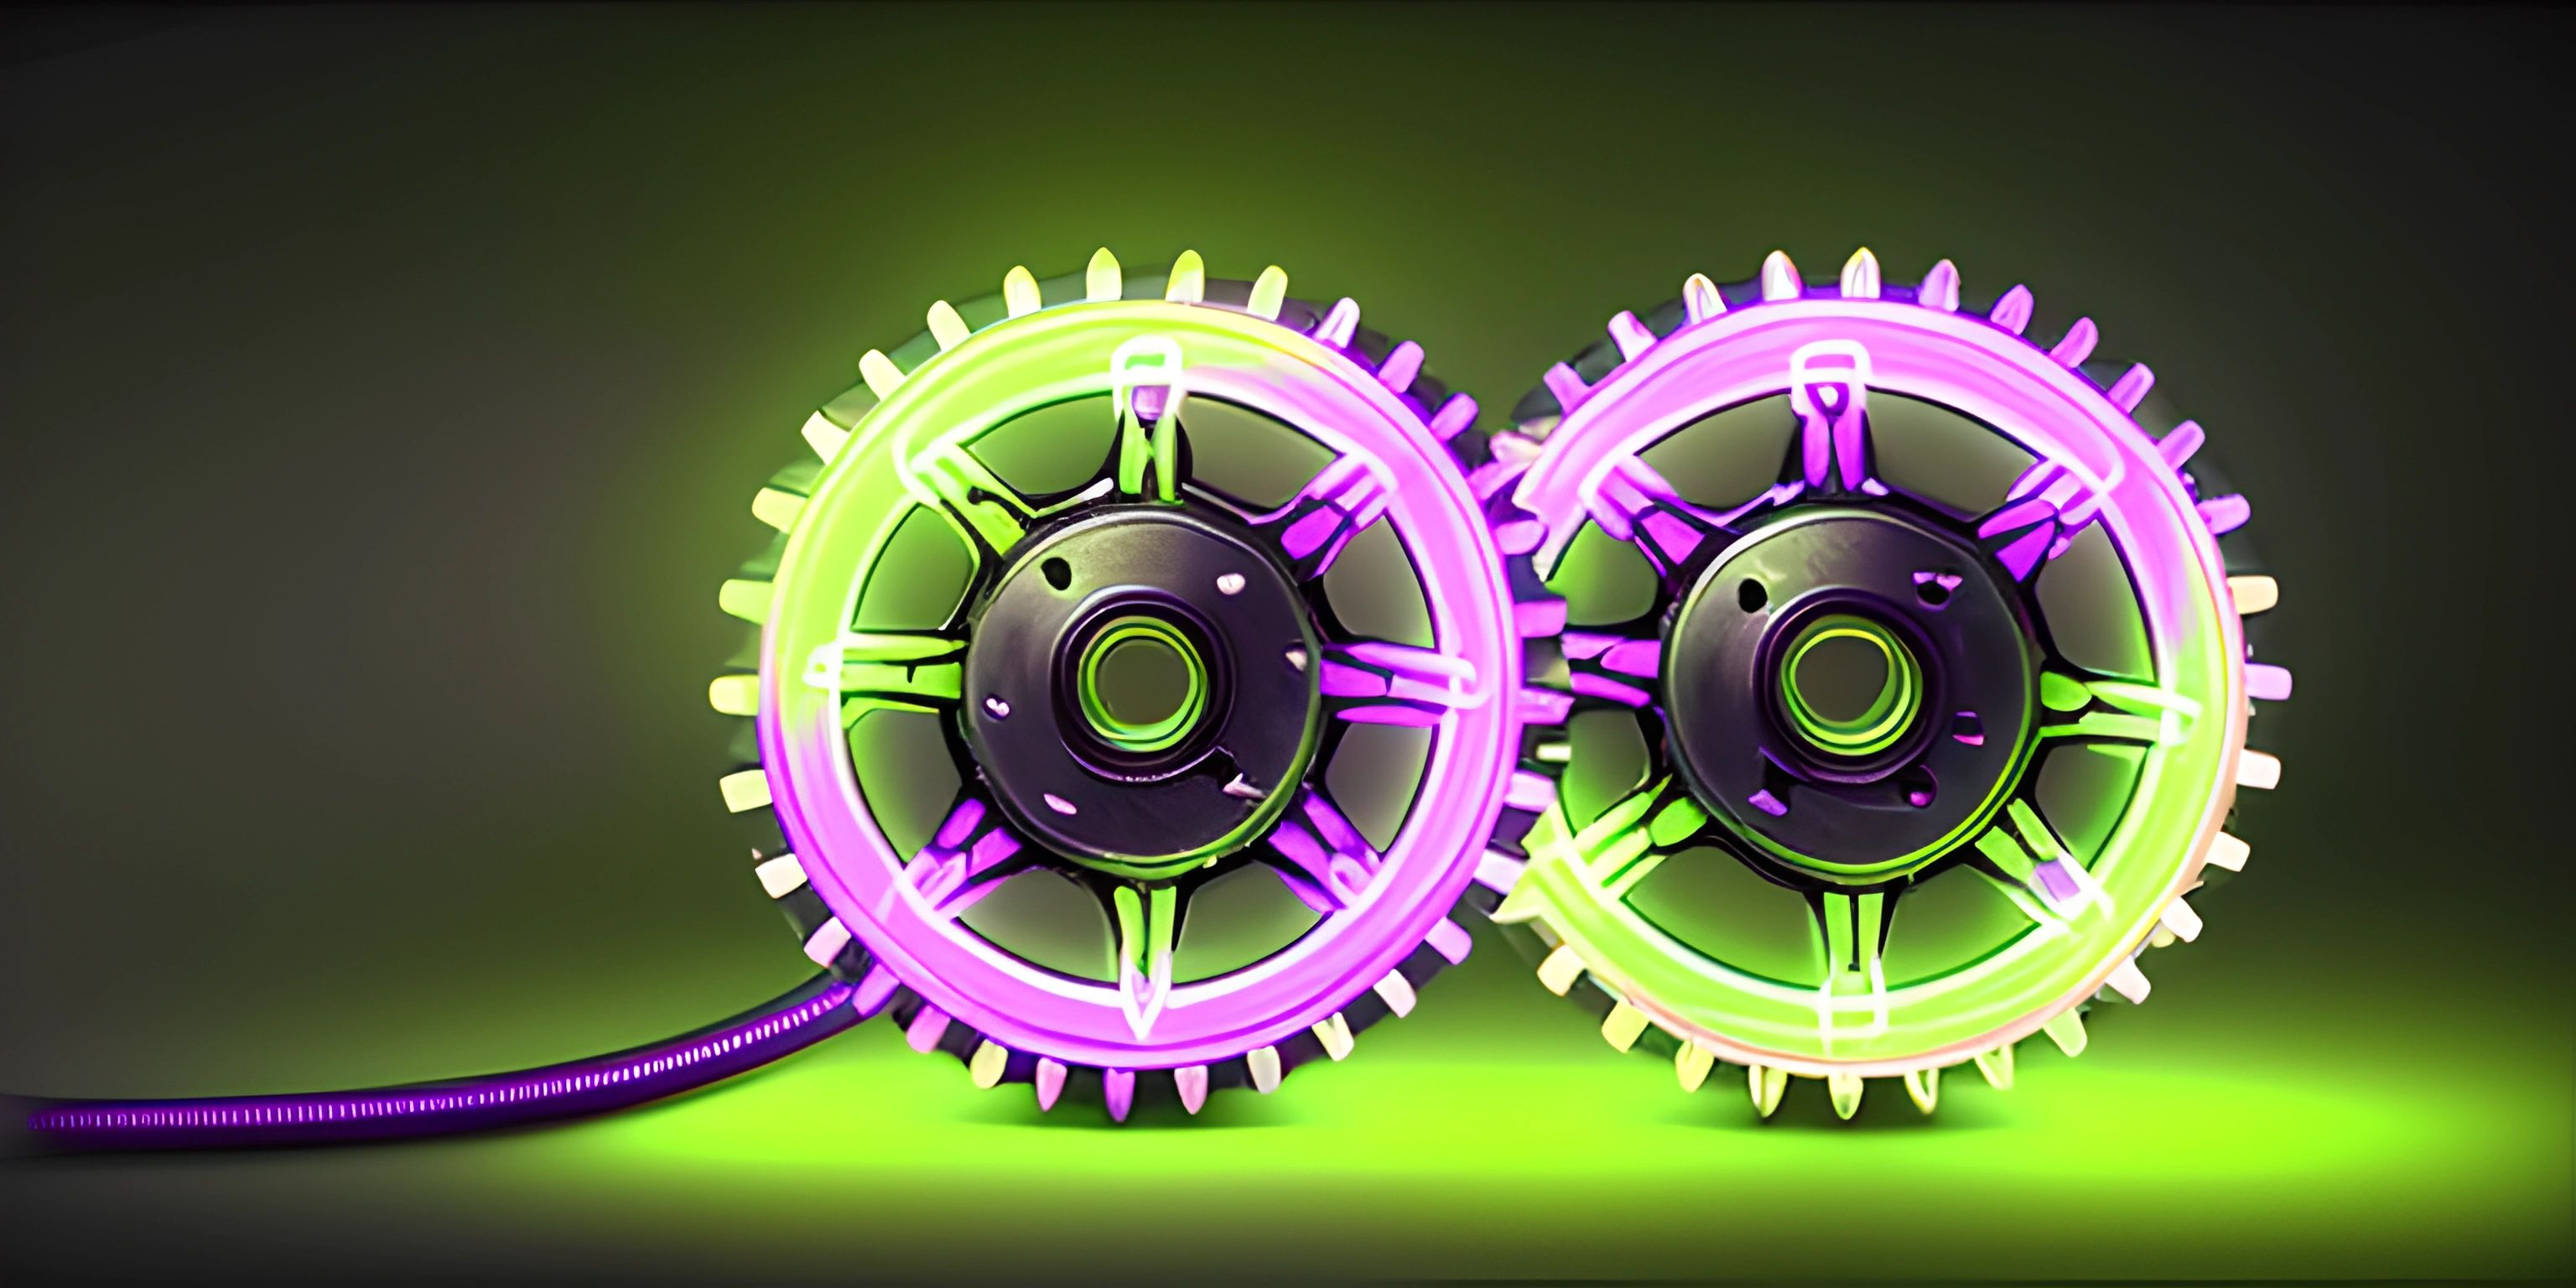 two spools are turned on in purple and green colors with neon lights on them